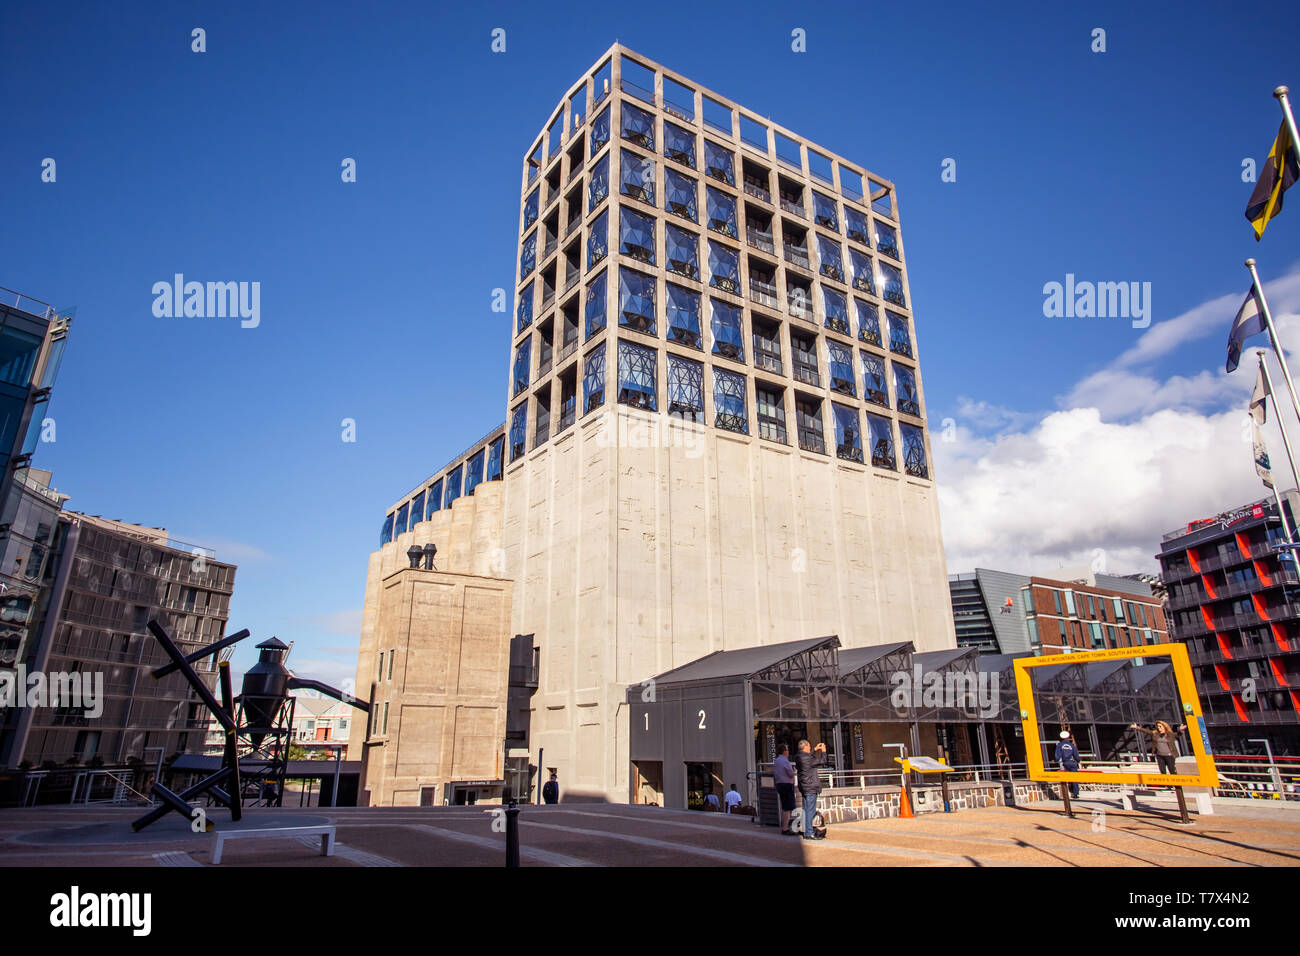 Cape Town, South Africa, 12th April - 2019: Exterior of contemporary art building. The building was converted out of old grain silos. Stock Photo